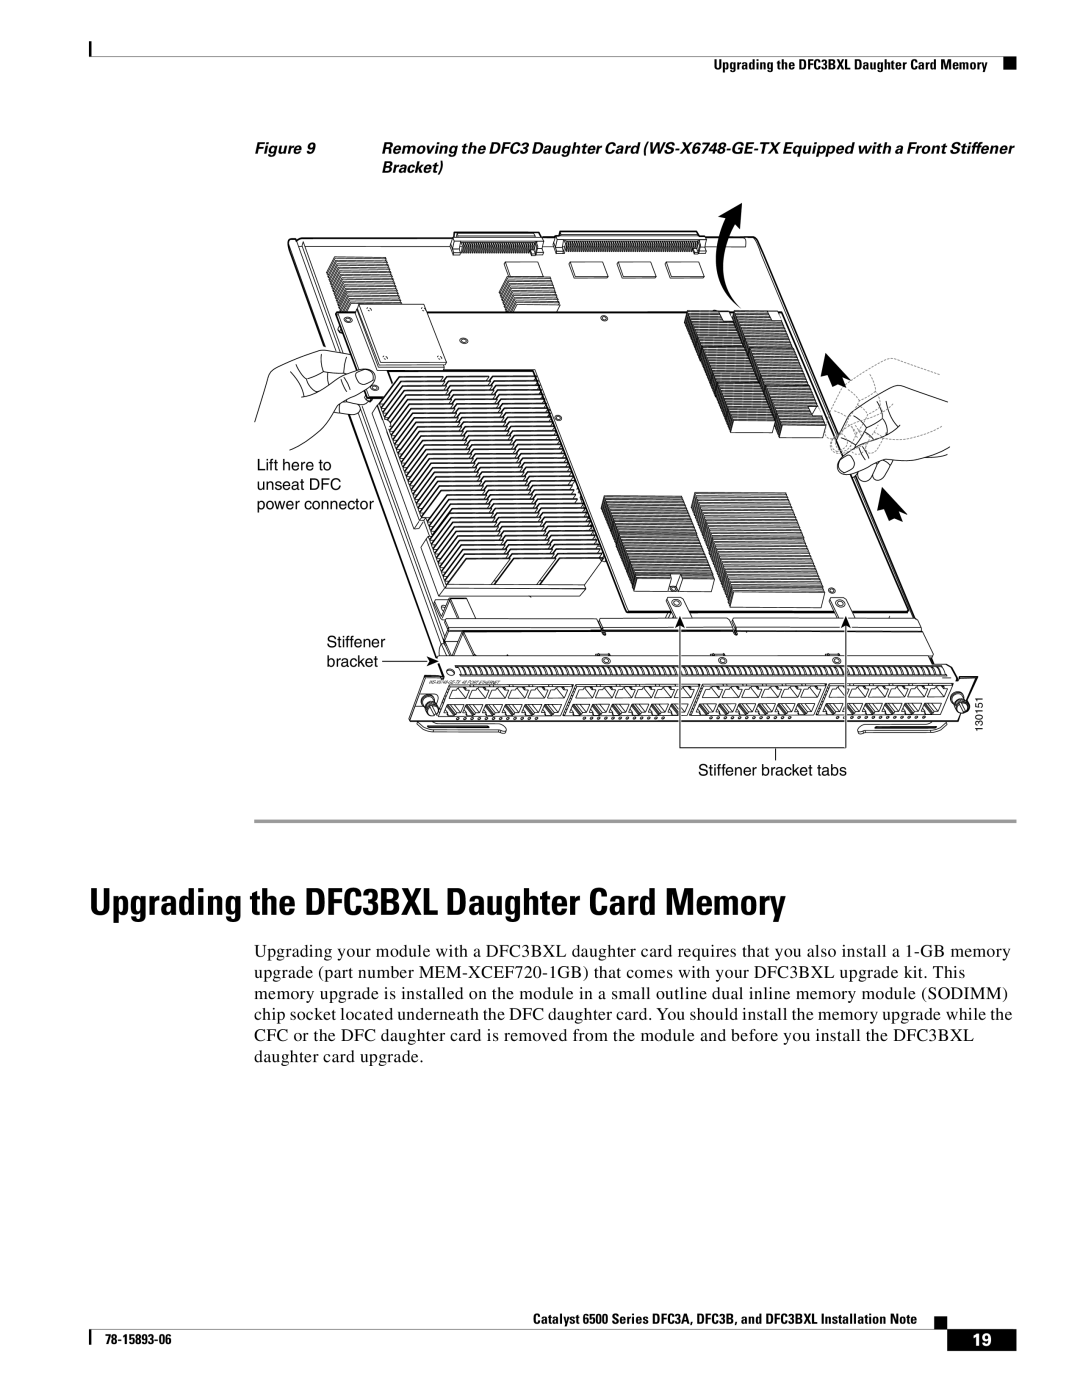 Cisco Systems Upgrading the DFC3BXL Daughter Card Memory, Lift here to unseat DFC power connector Stiffener bracket 